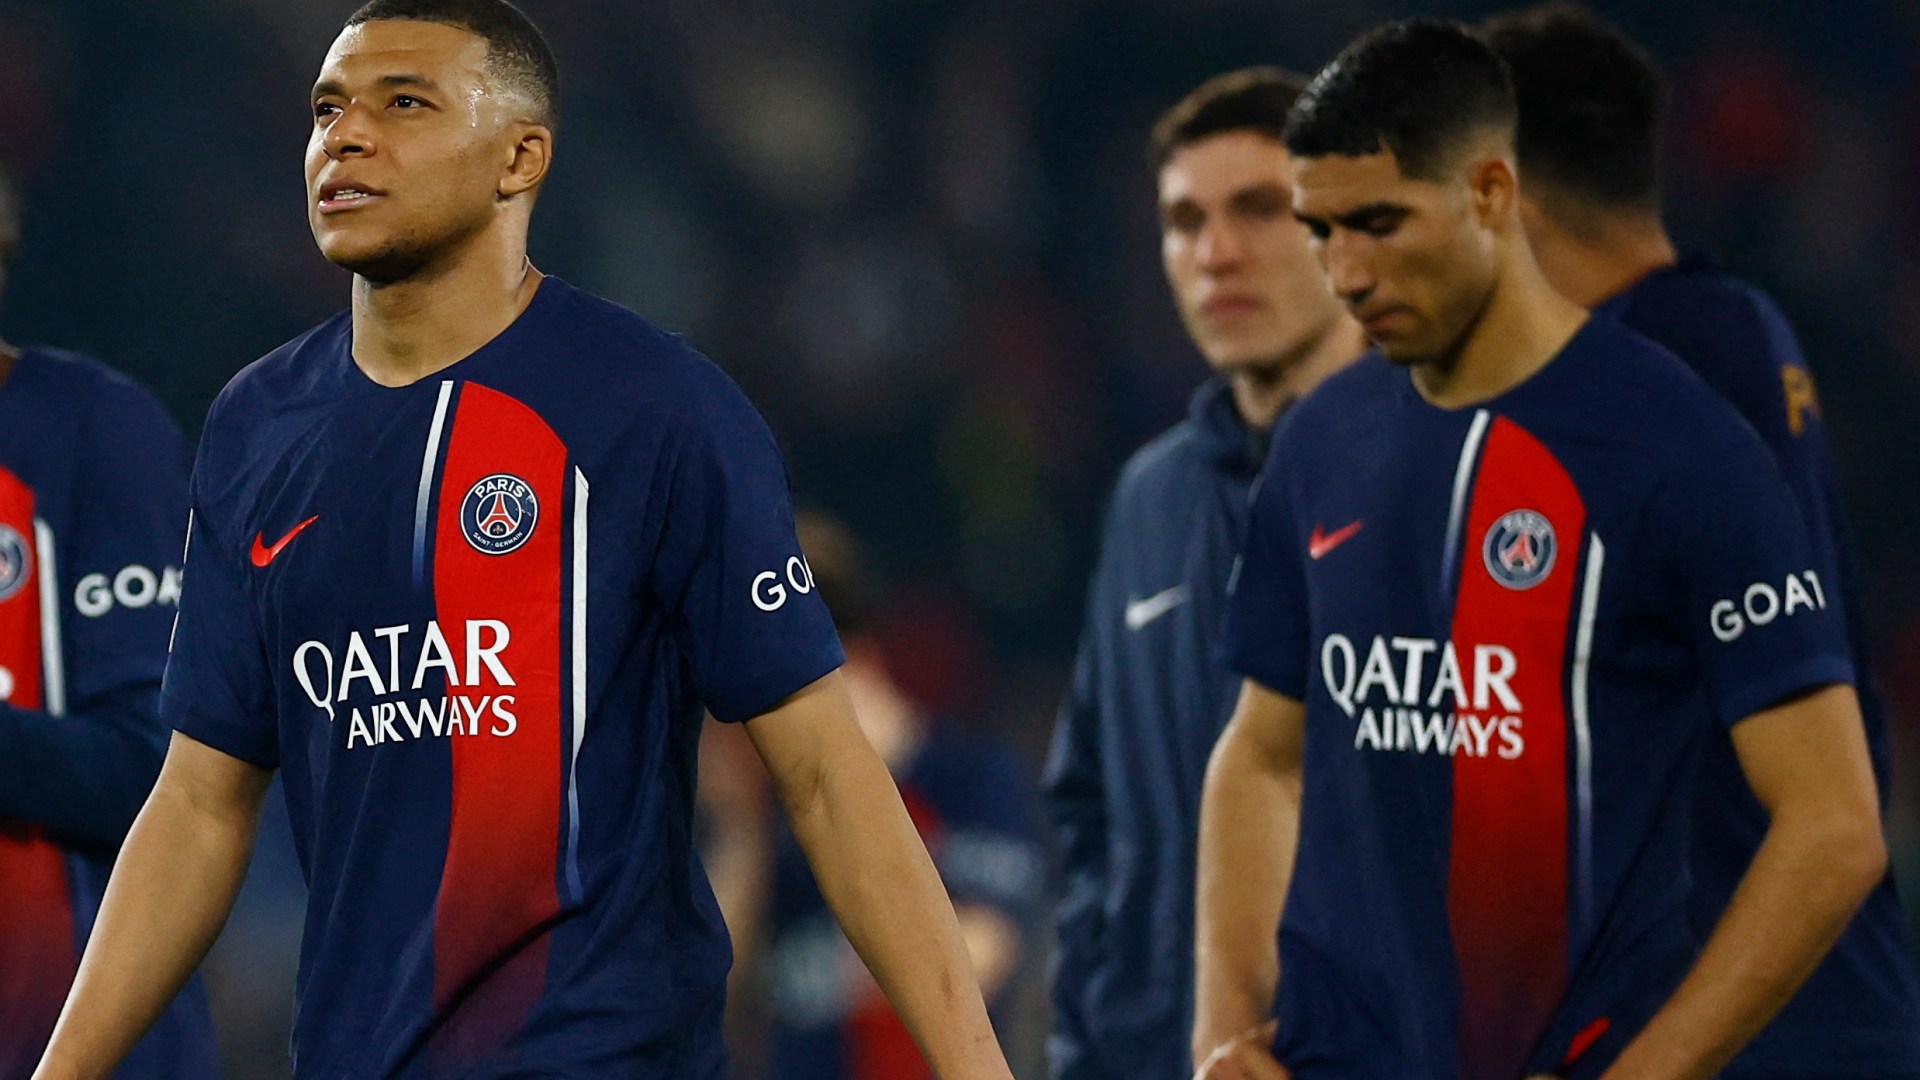 PSG staff told to prepare for trip to Wembley before embarrassing Champions League semi-final defeat against Dortmund [Video]